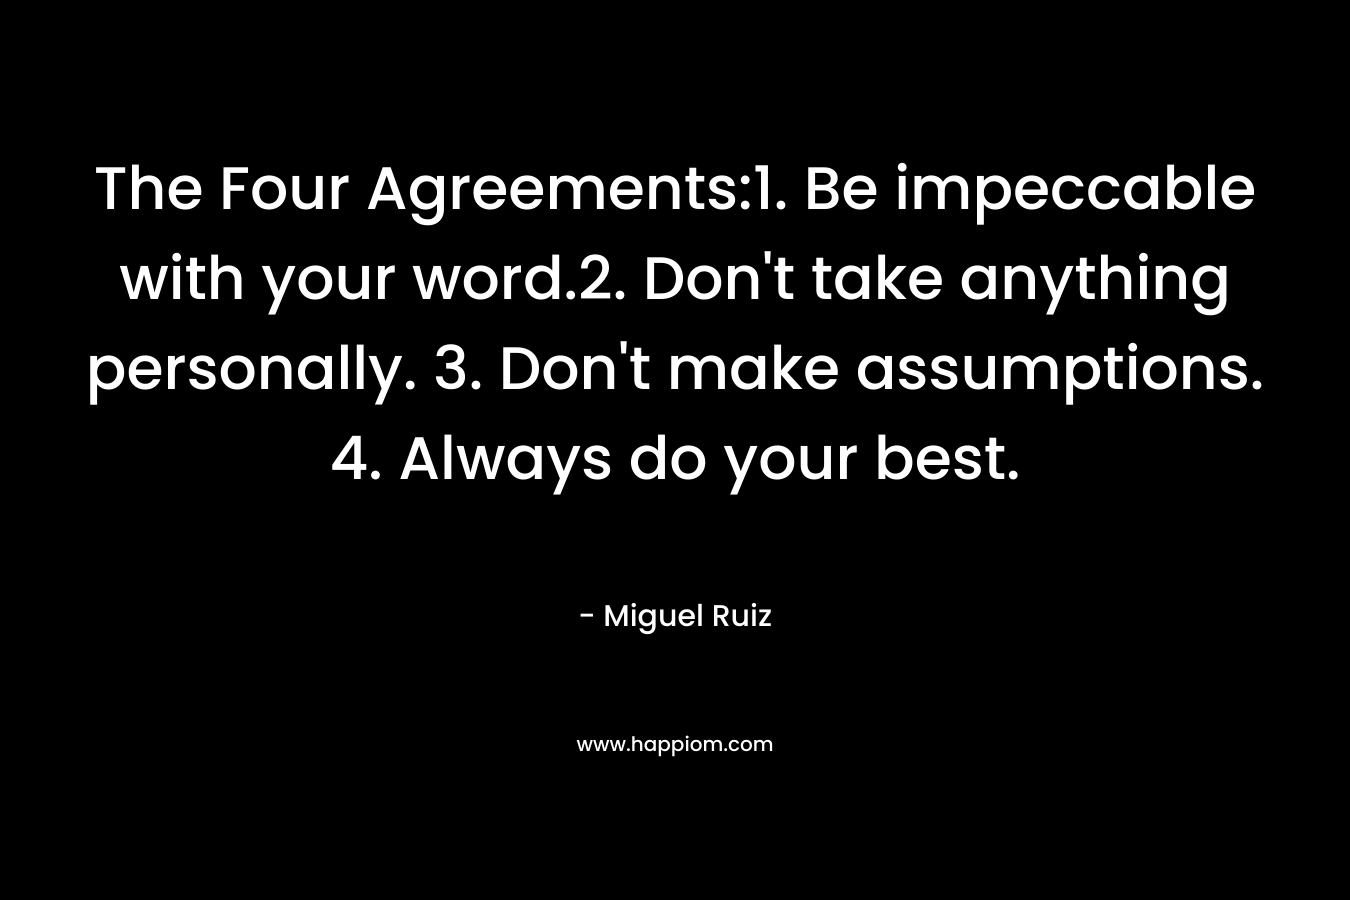 The Four Agreements:1. Be impeccable with your word.2. Don't take anything personally. 3. Don't make assumptions. 4. Always do your best.